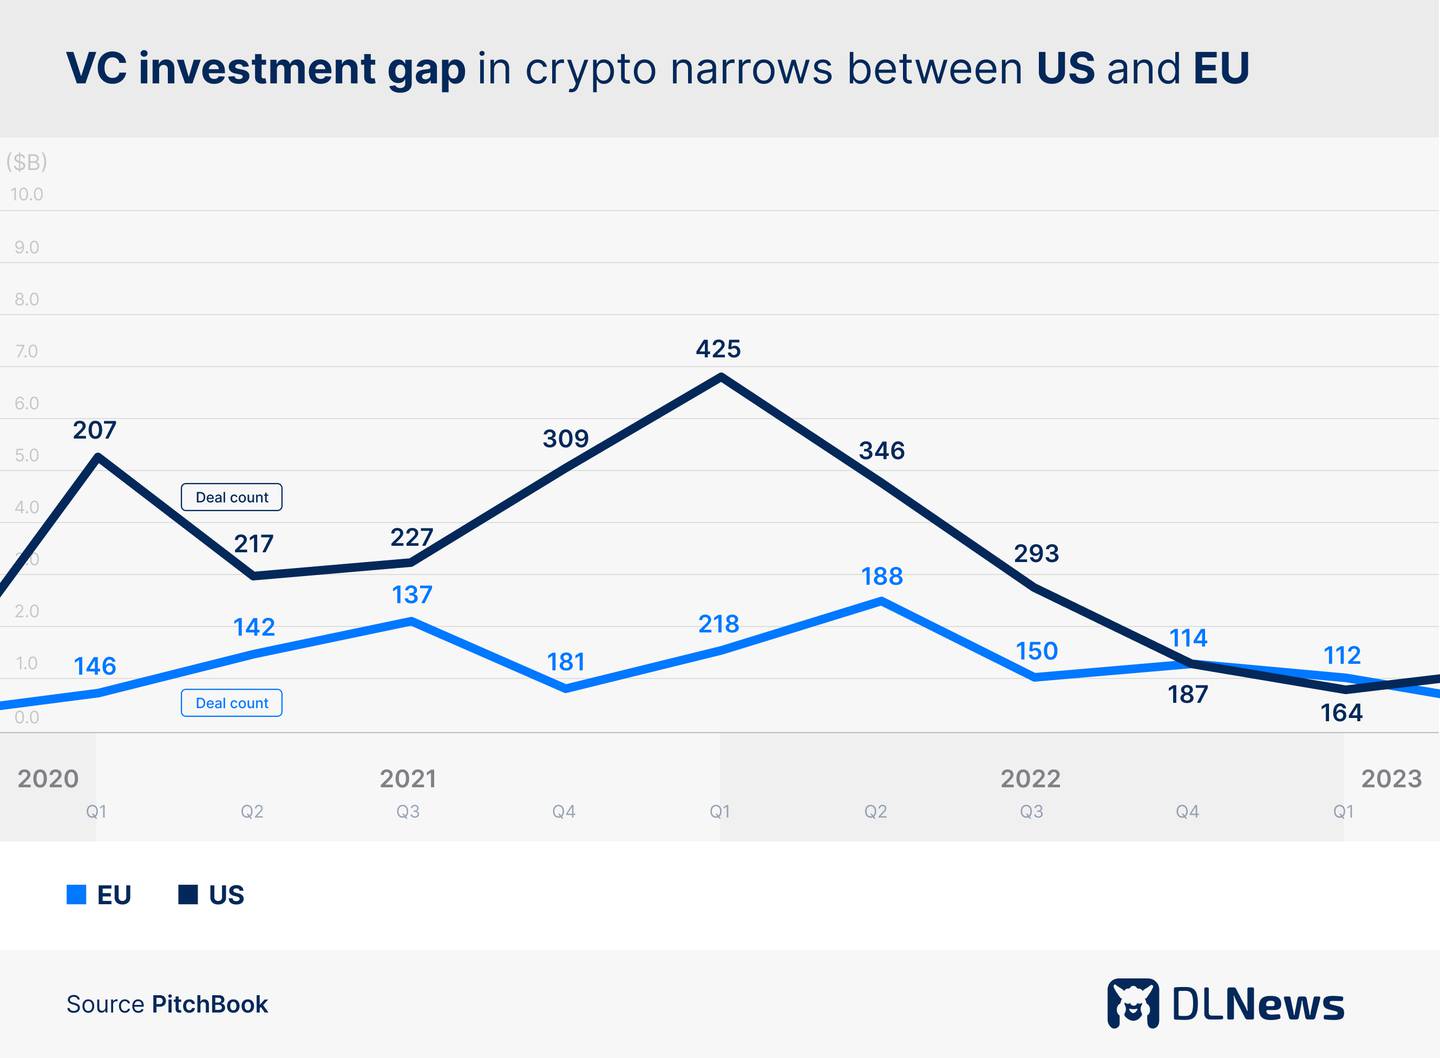 VC investment gap in crypto narrows between US and EU.